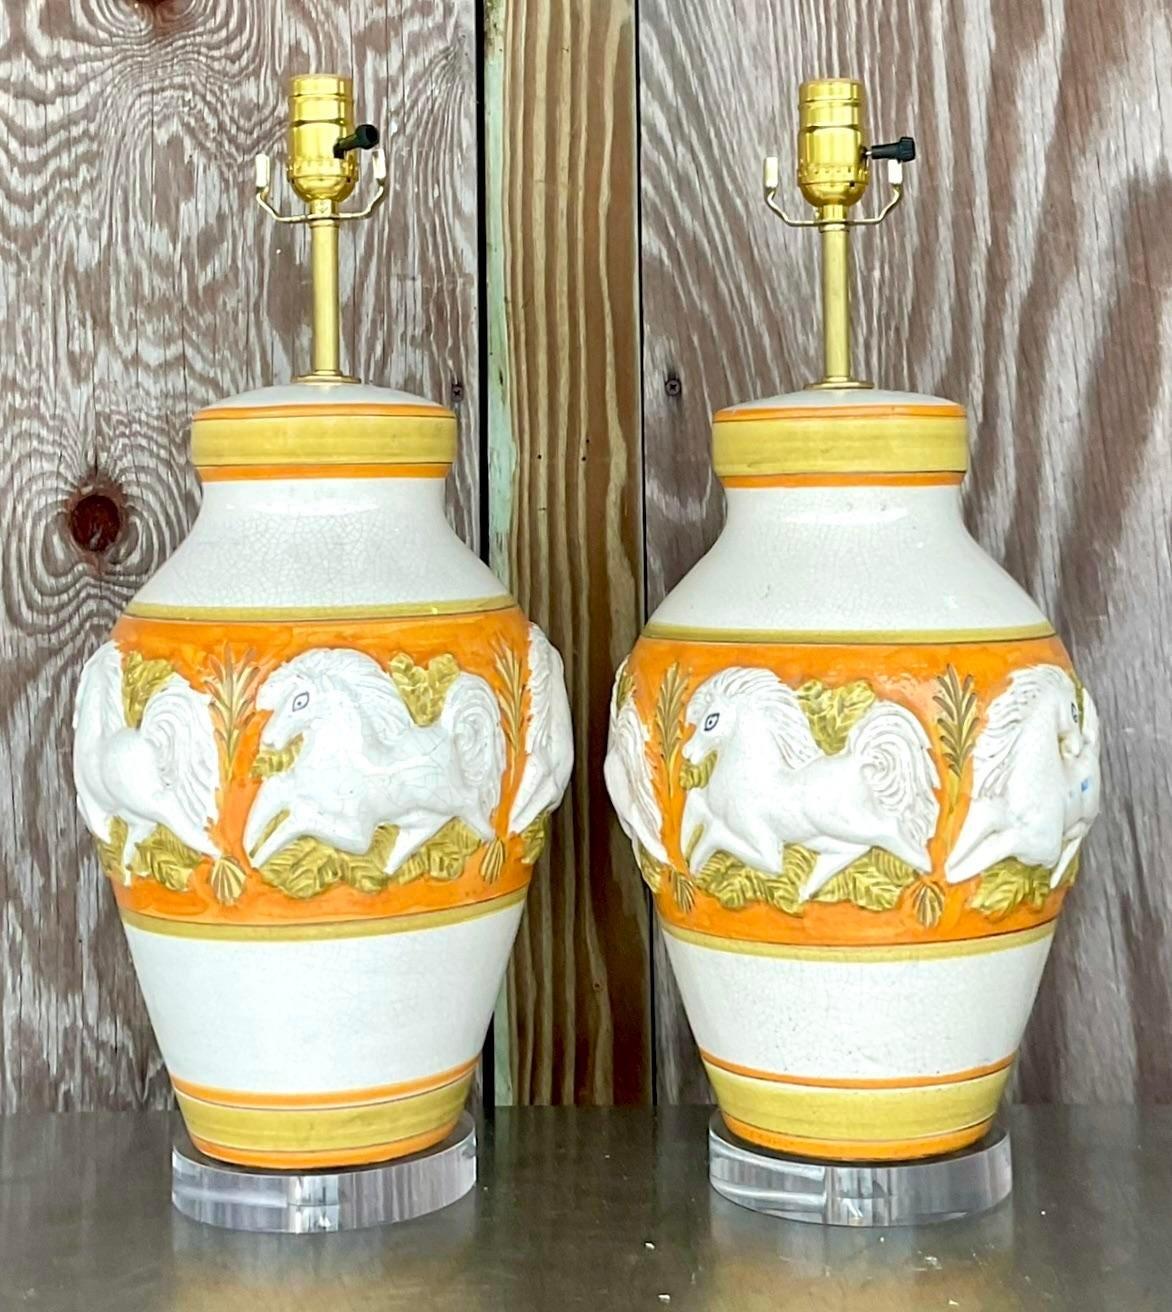 Italian Vintage Mid-Century Modern Glazed Ceramic Prancing Horse Lamps - a Pair For Sale